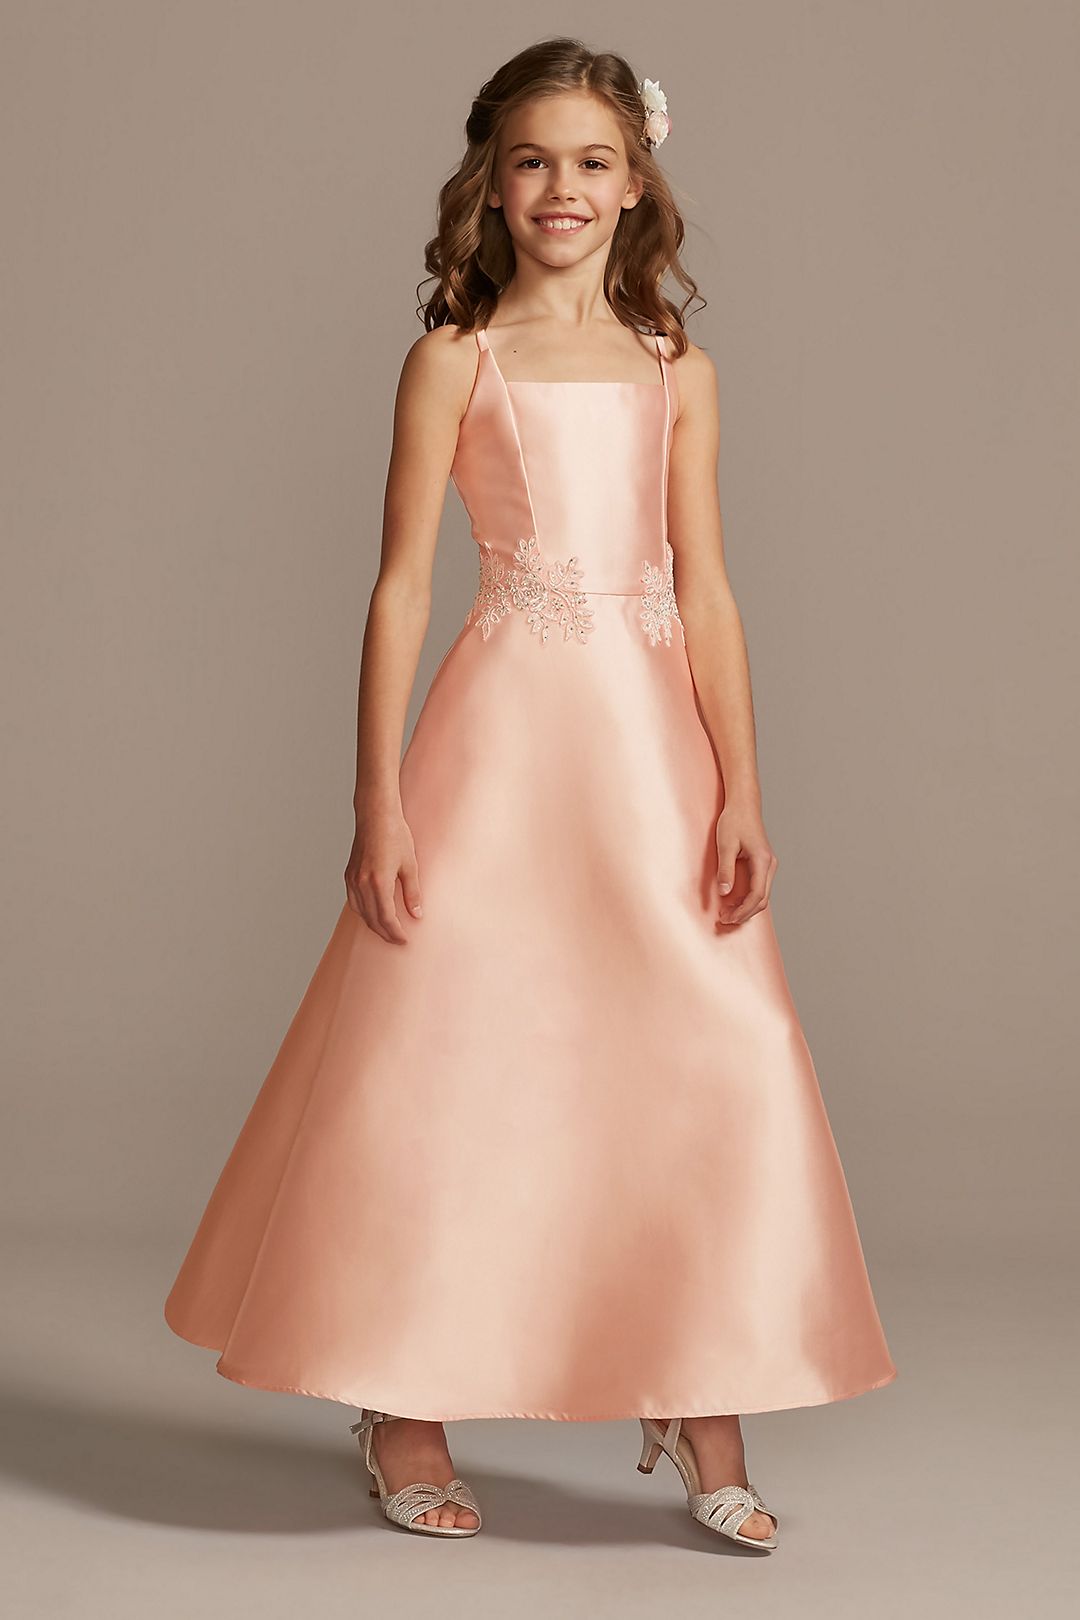 Square Neck Embroidered Mikado Flower Girl Dress Image